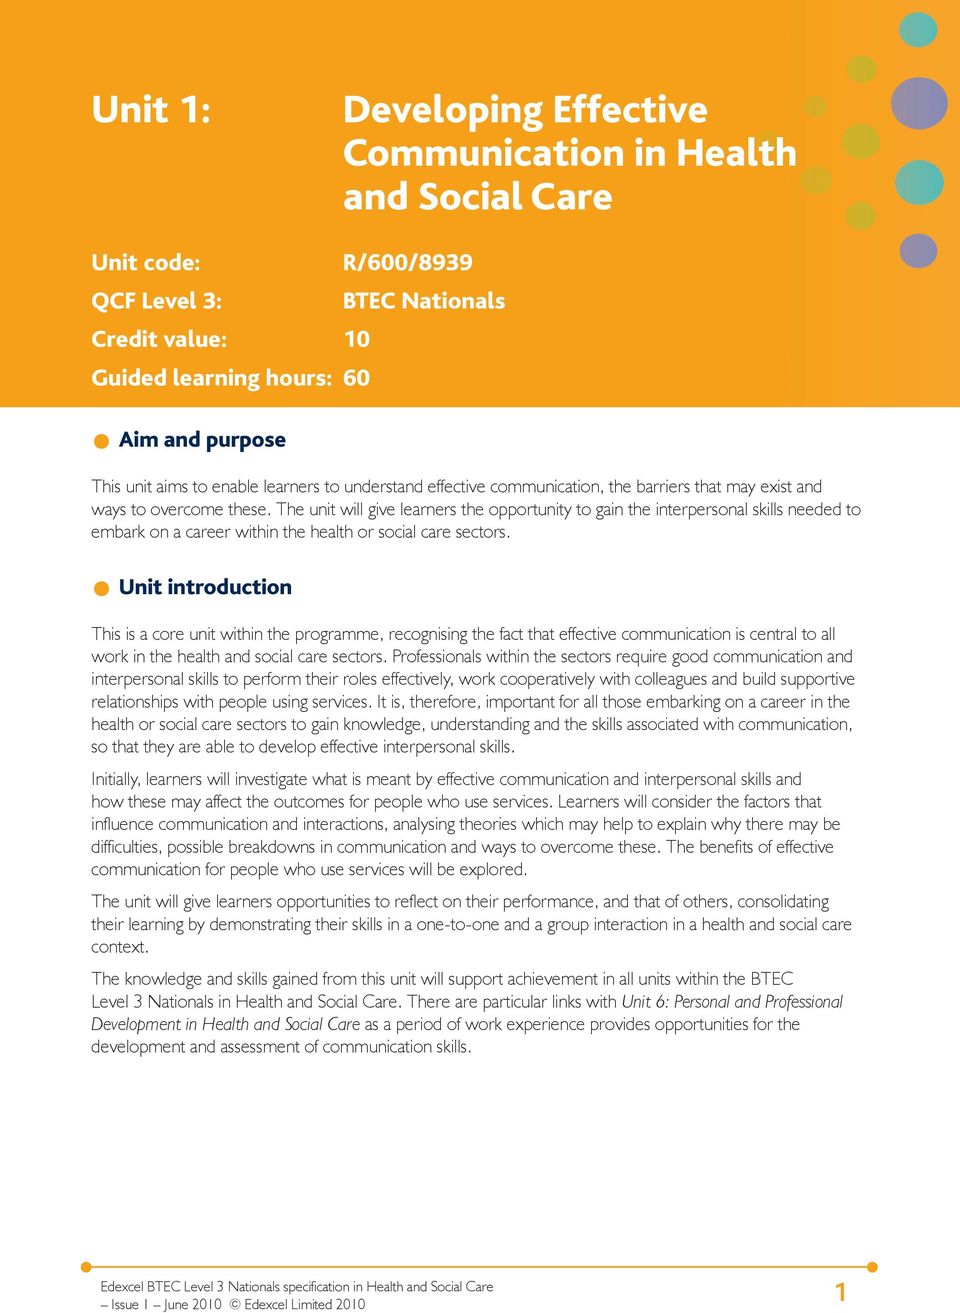 The unit will give learners the opportunity to gain the interpersonal skills needed to embark on a career within the health or social care sectors.